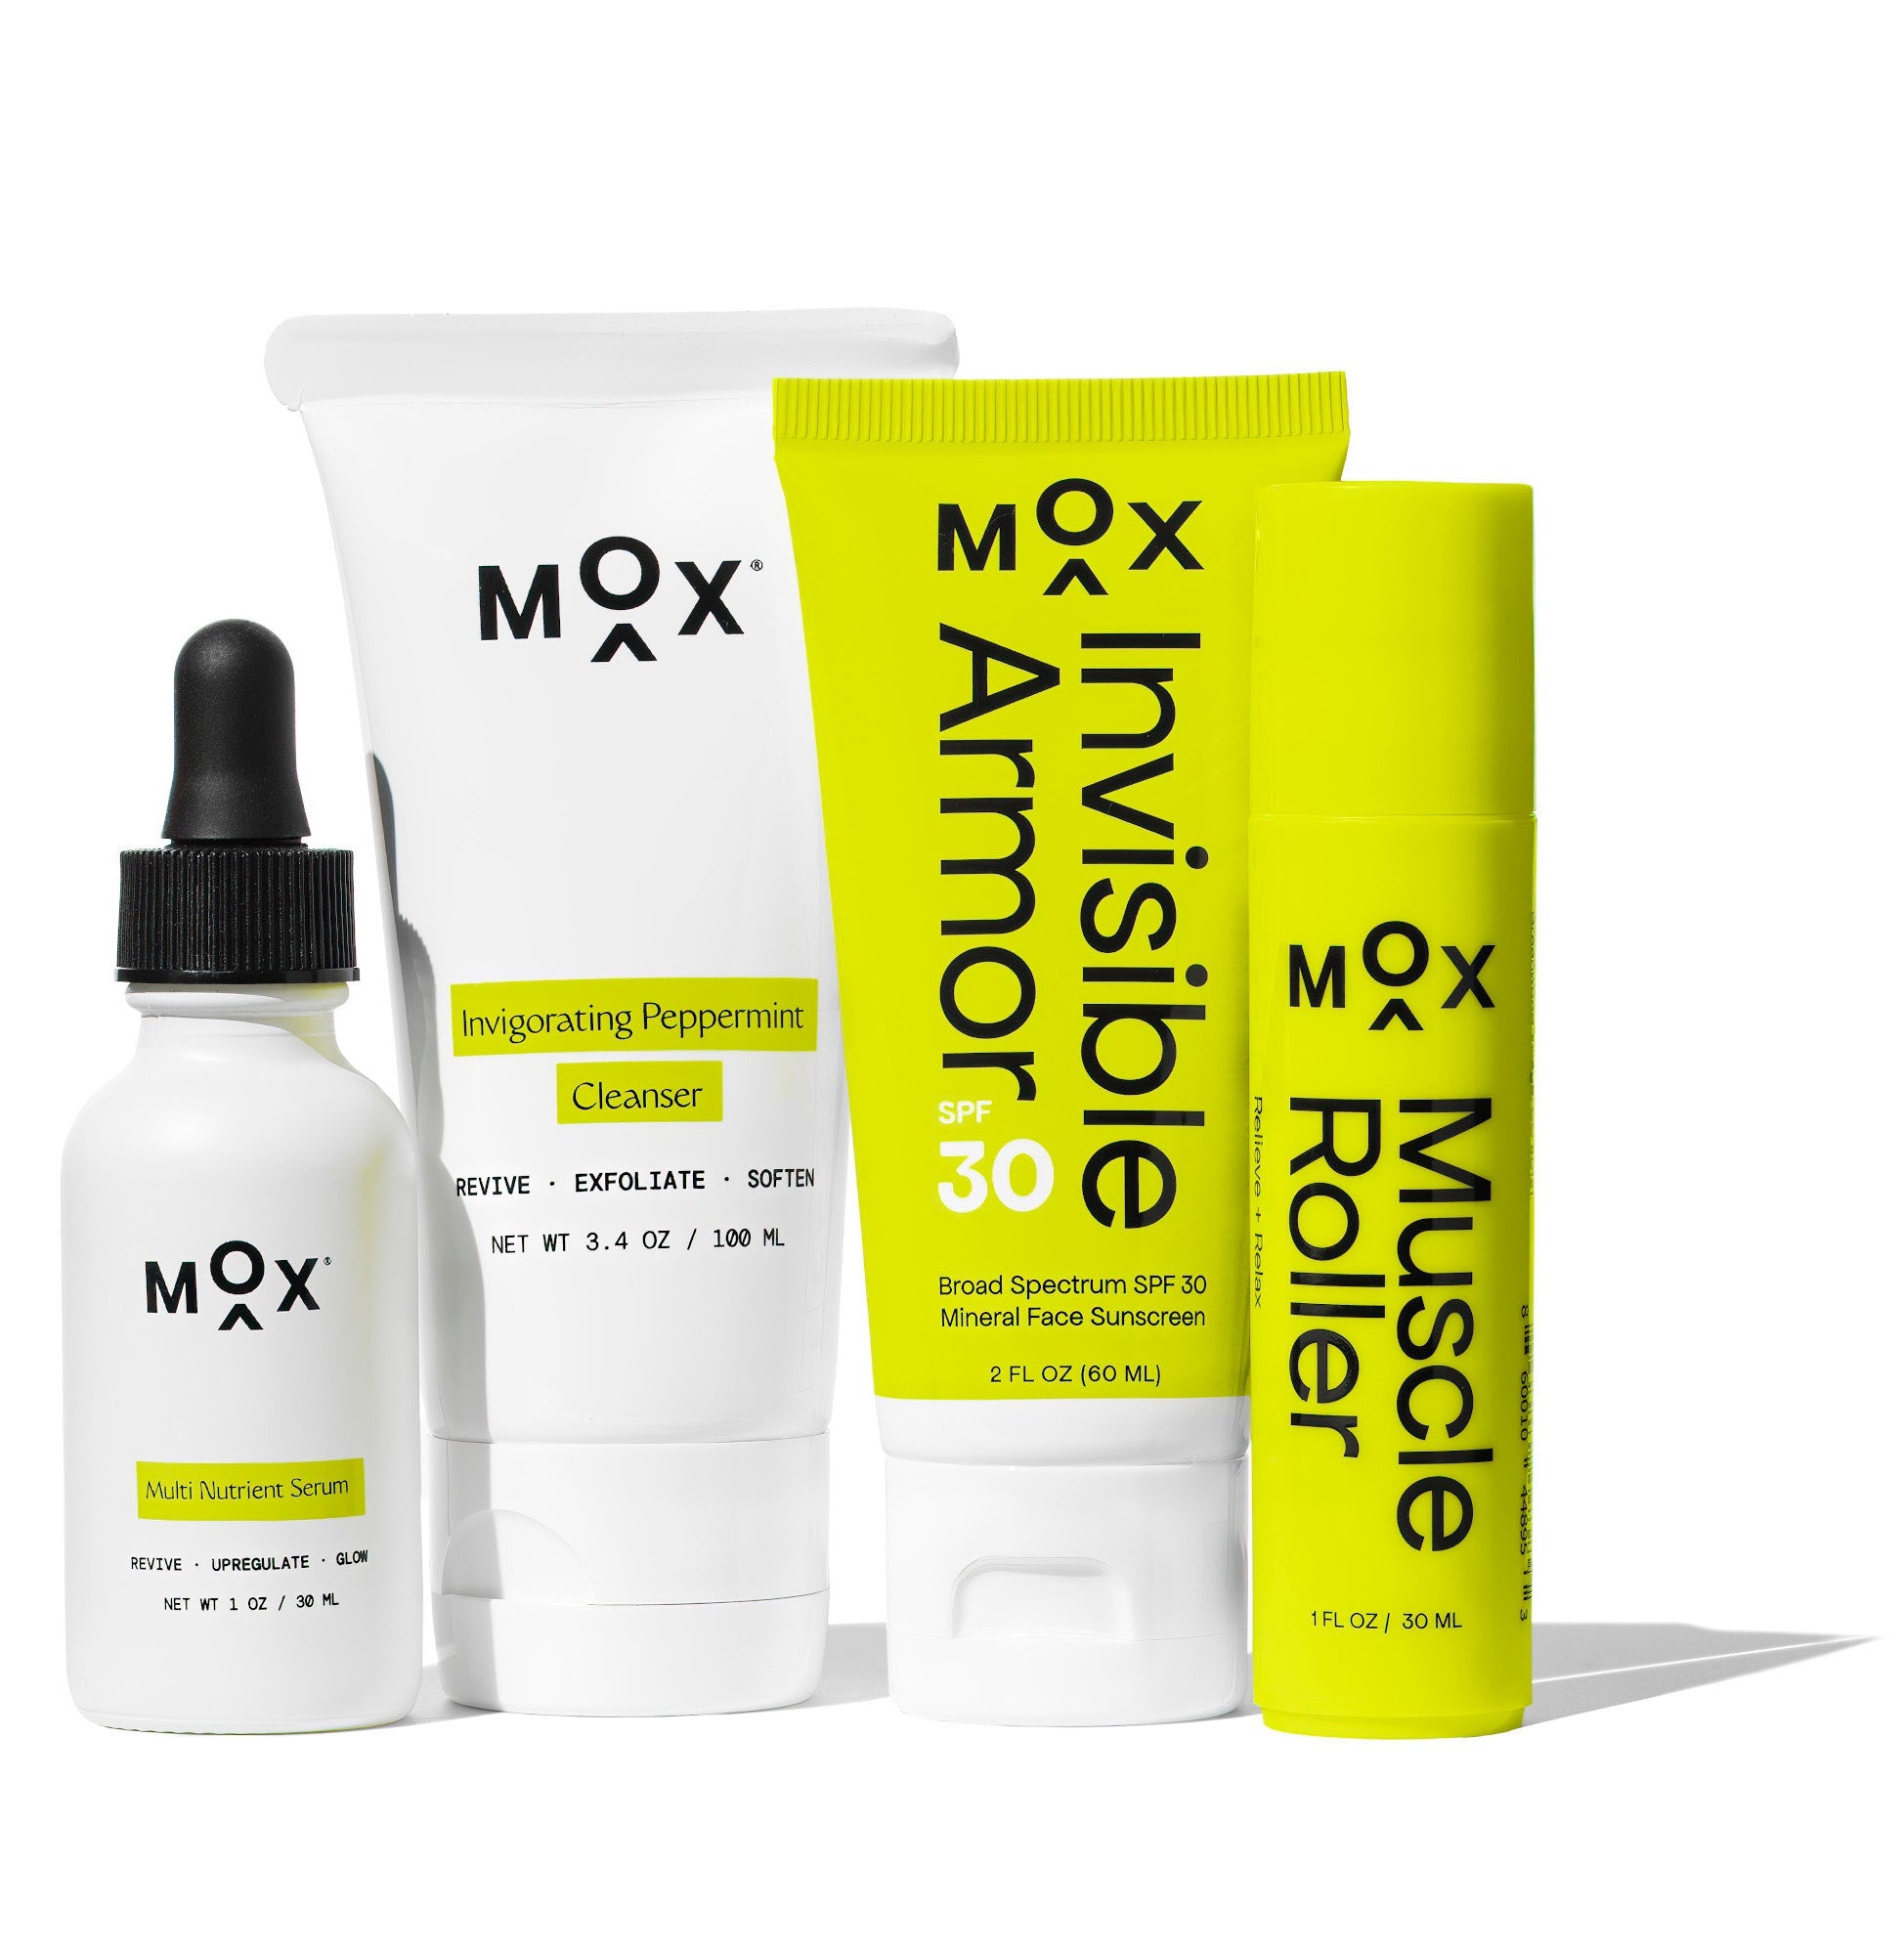 The Outdoor Set - MOX Skincare